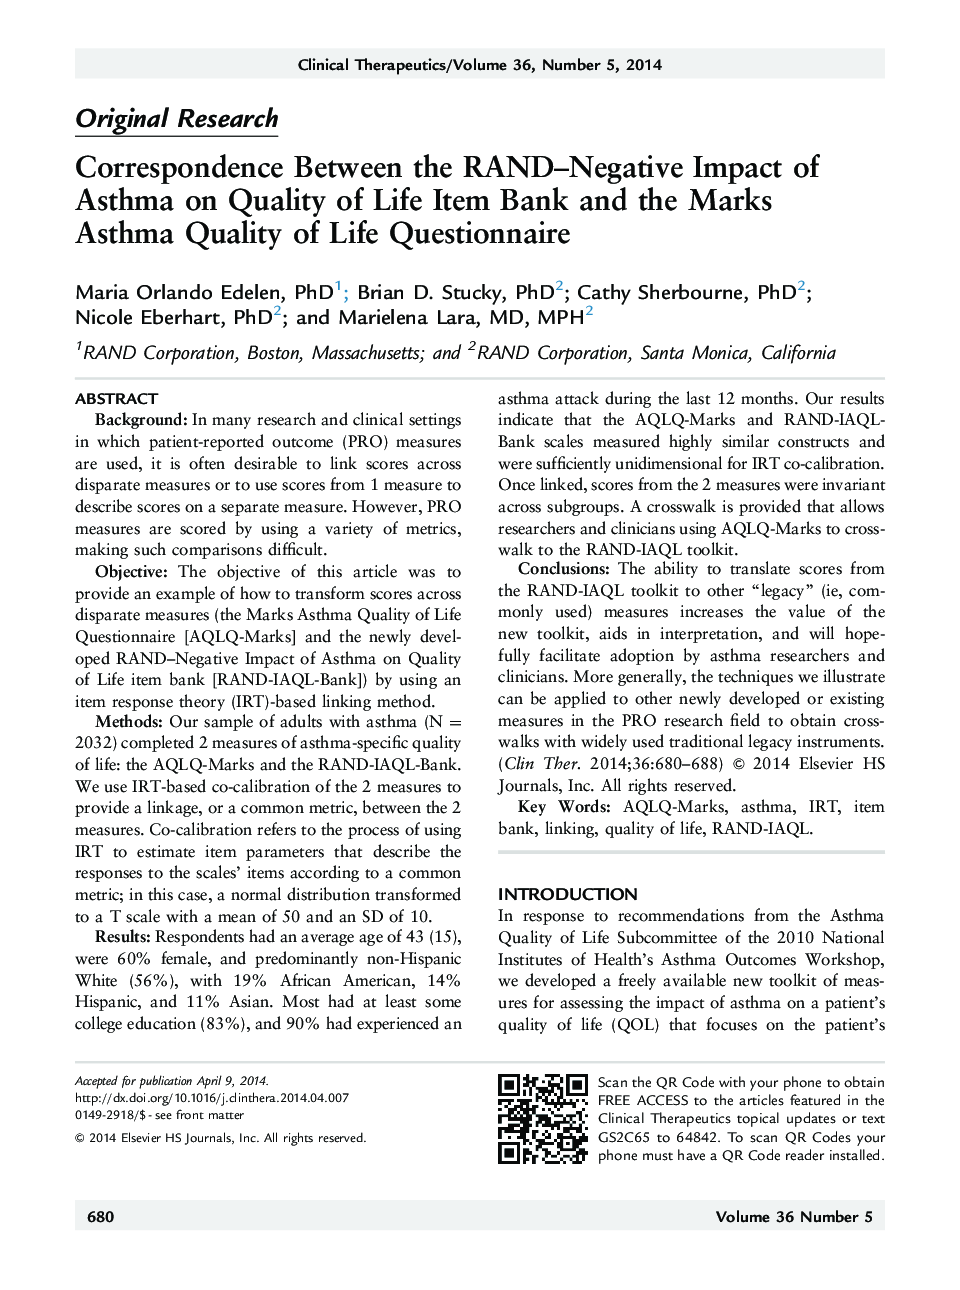 Original ResearchCorrespondence Between the RAND-Negative Impact of Asthma on Quality of Life Item Bank and the Marks Asthma Quality of Life Questionnaire